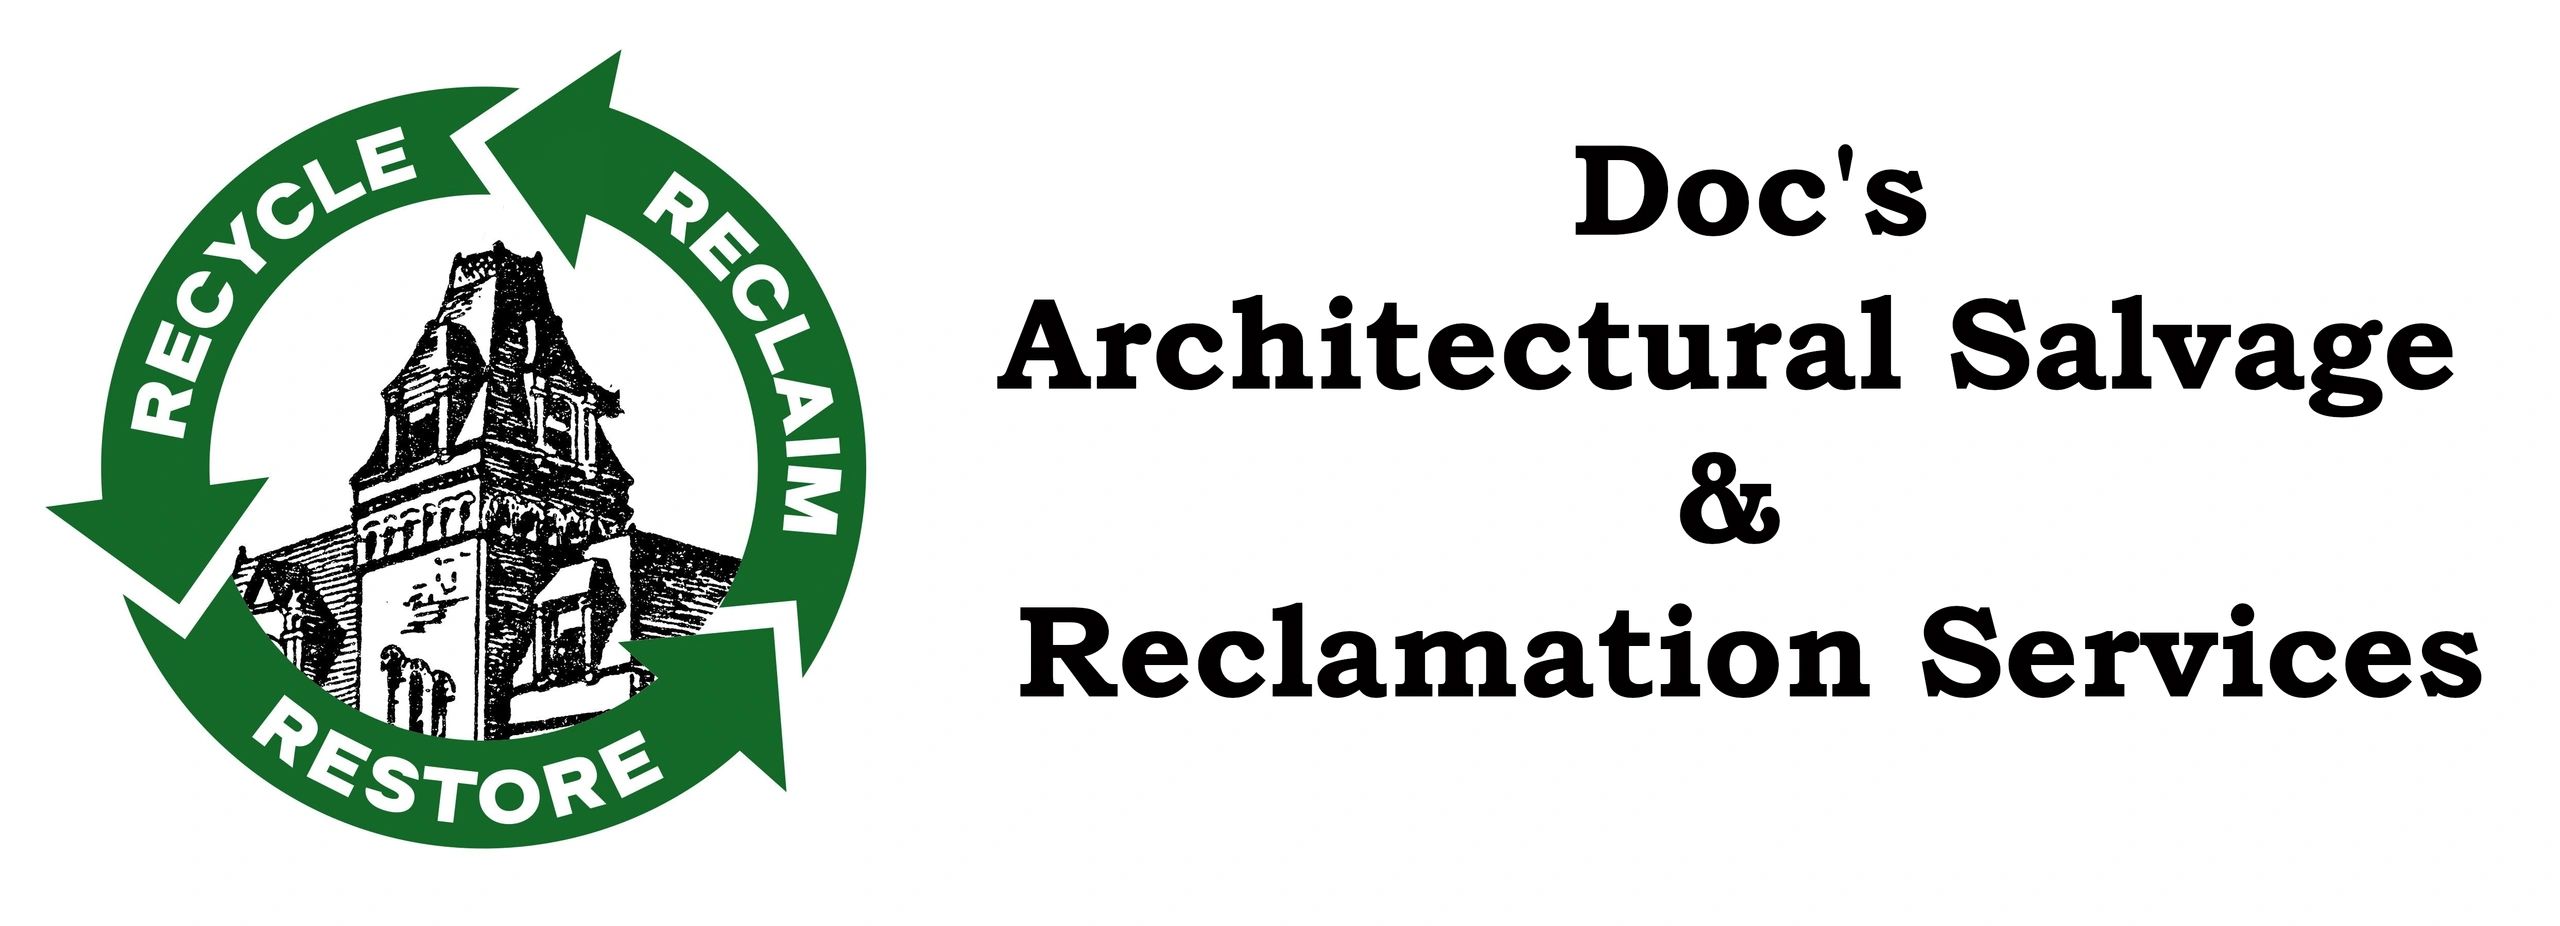 Doc's Architectural Salvage